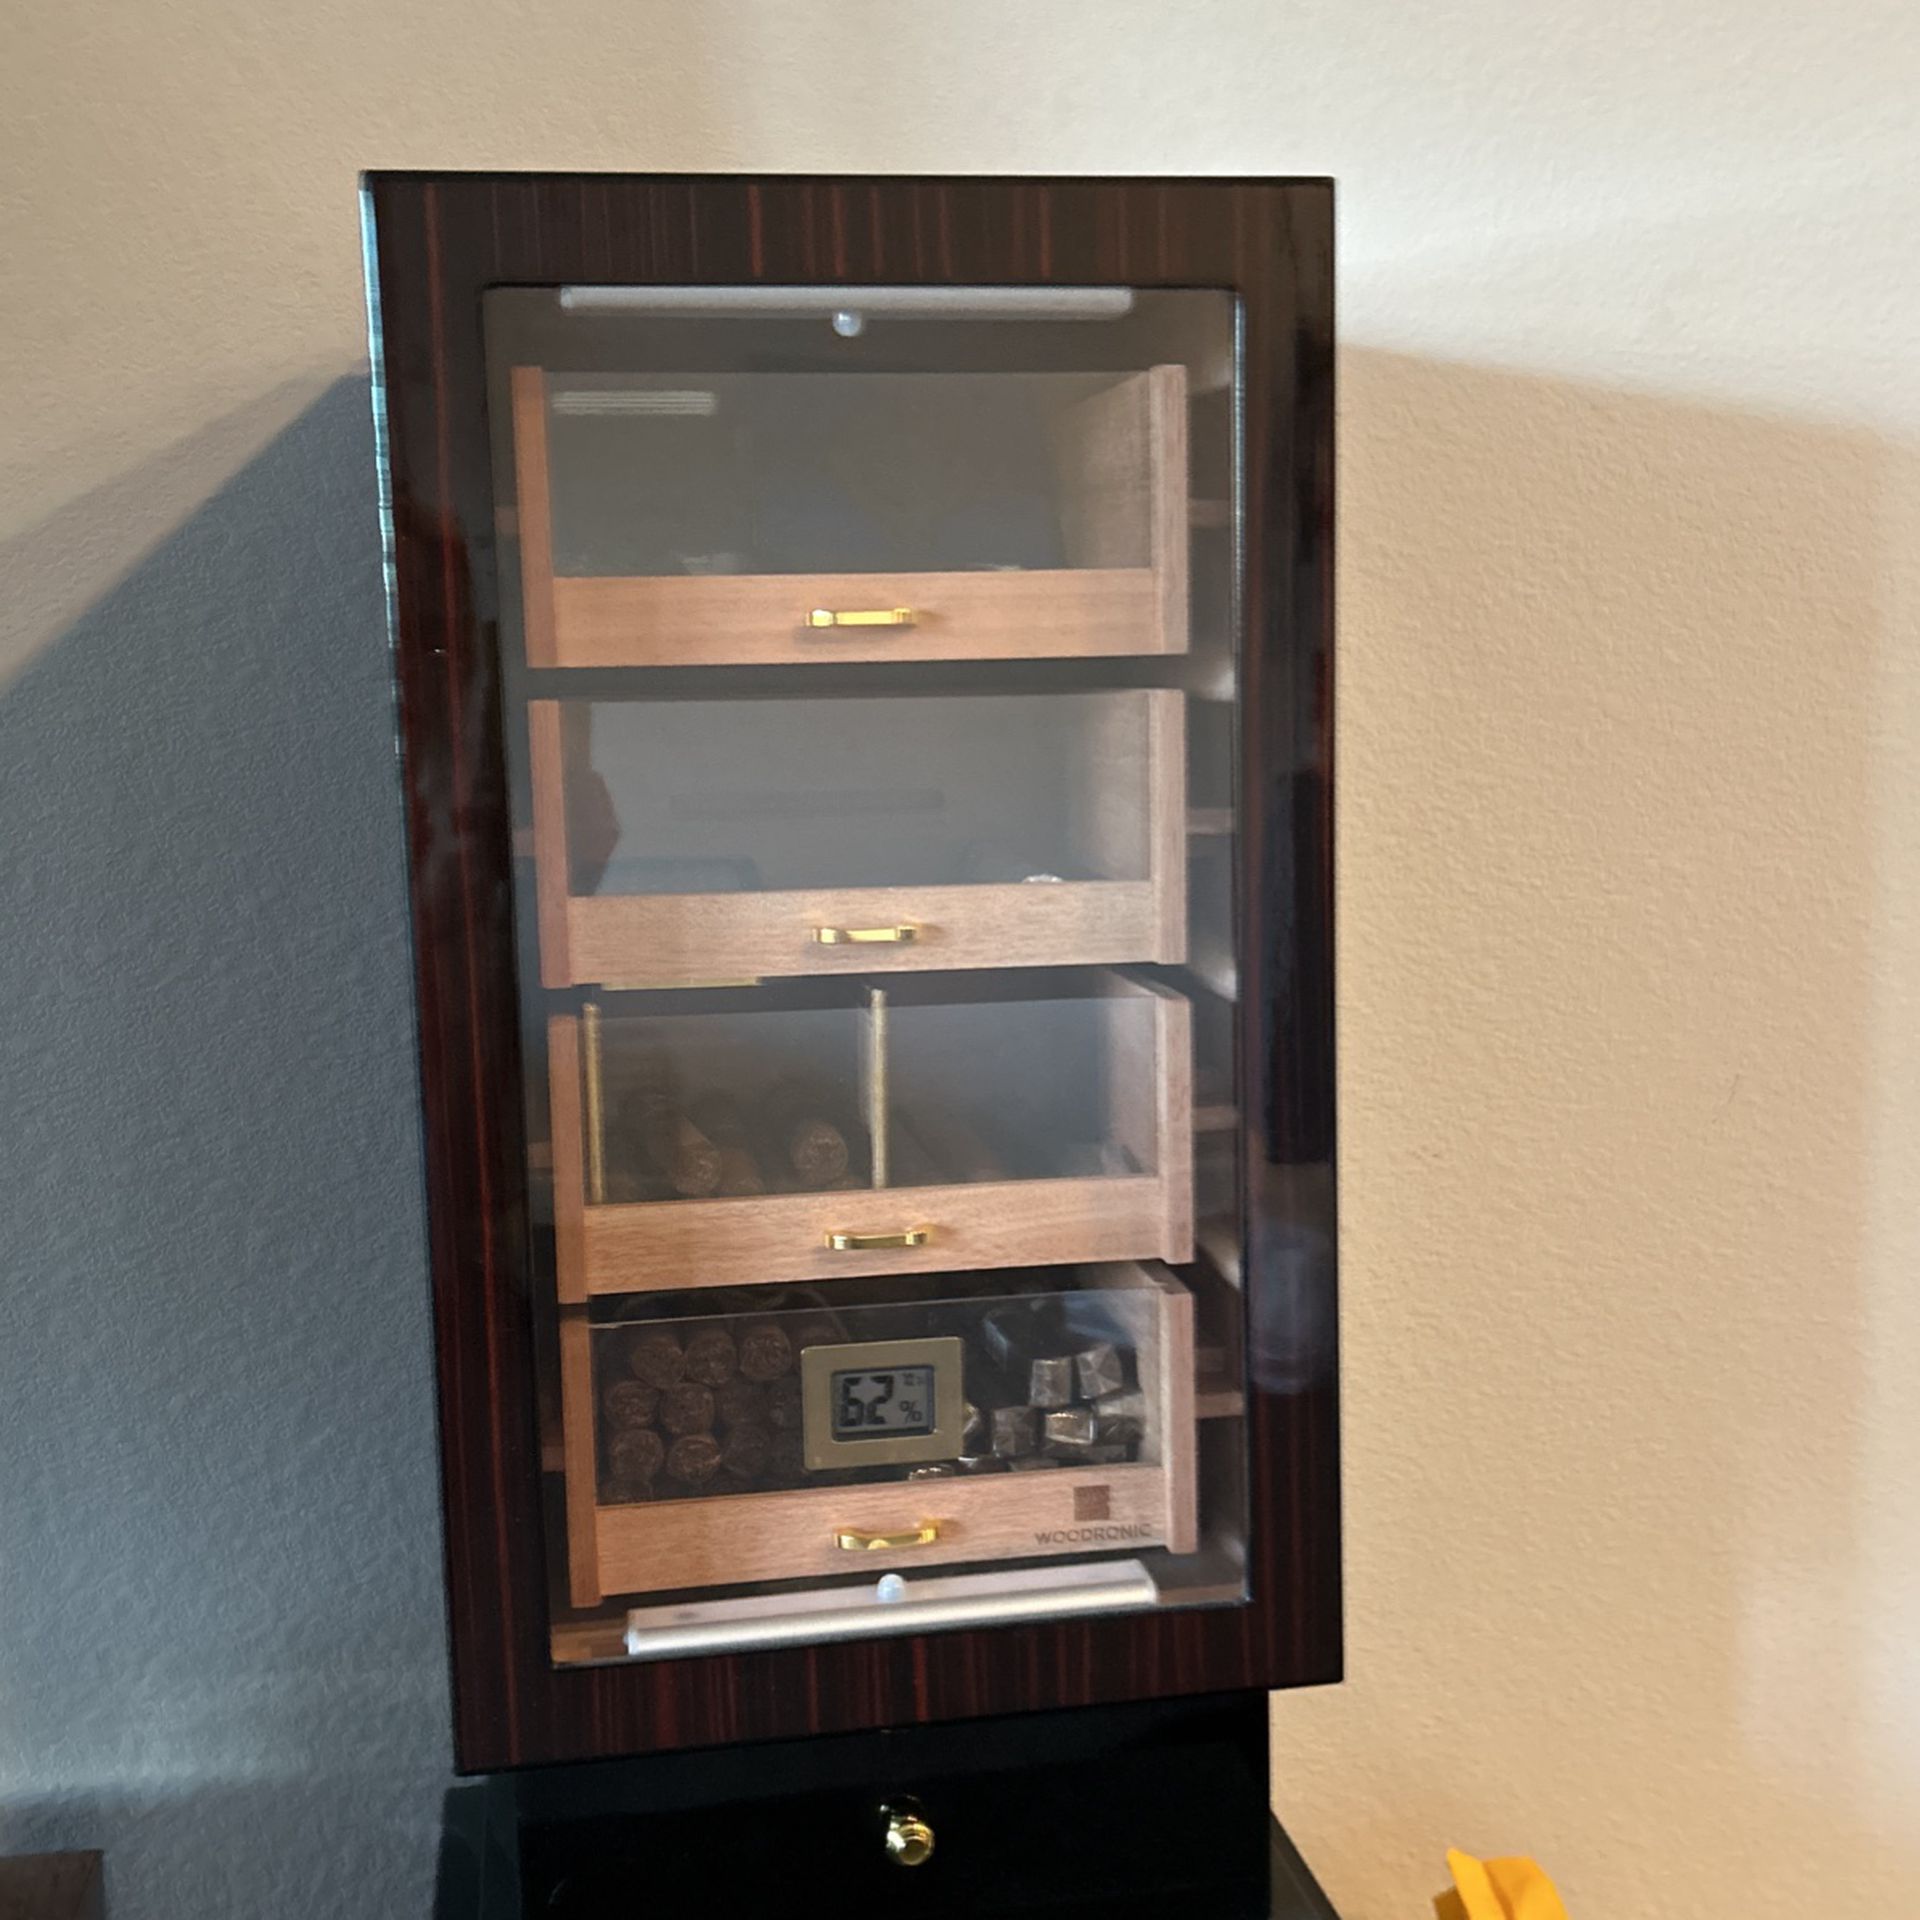 Wood Cigar Case With Build In Humidifiers Comes With Cigars